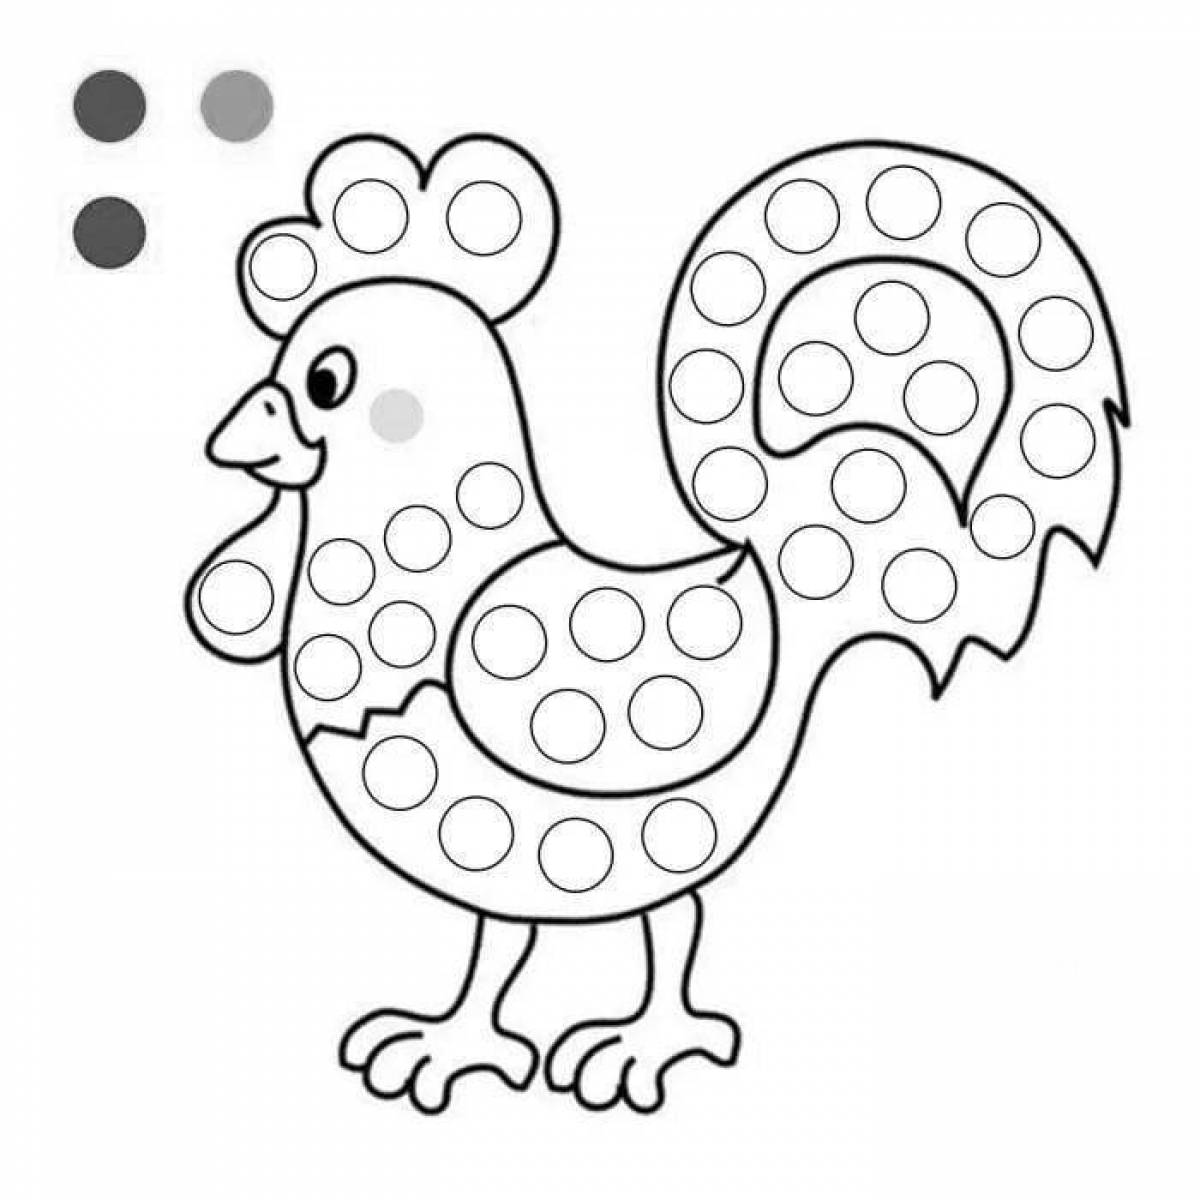 Creative coloring templates for kids